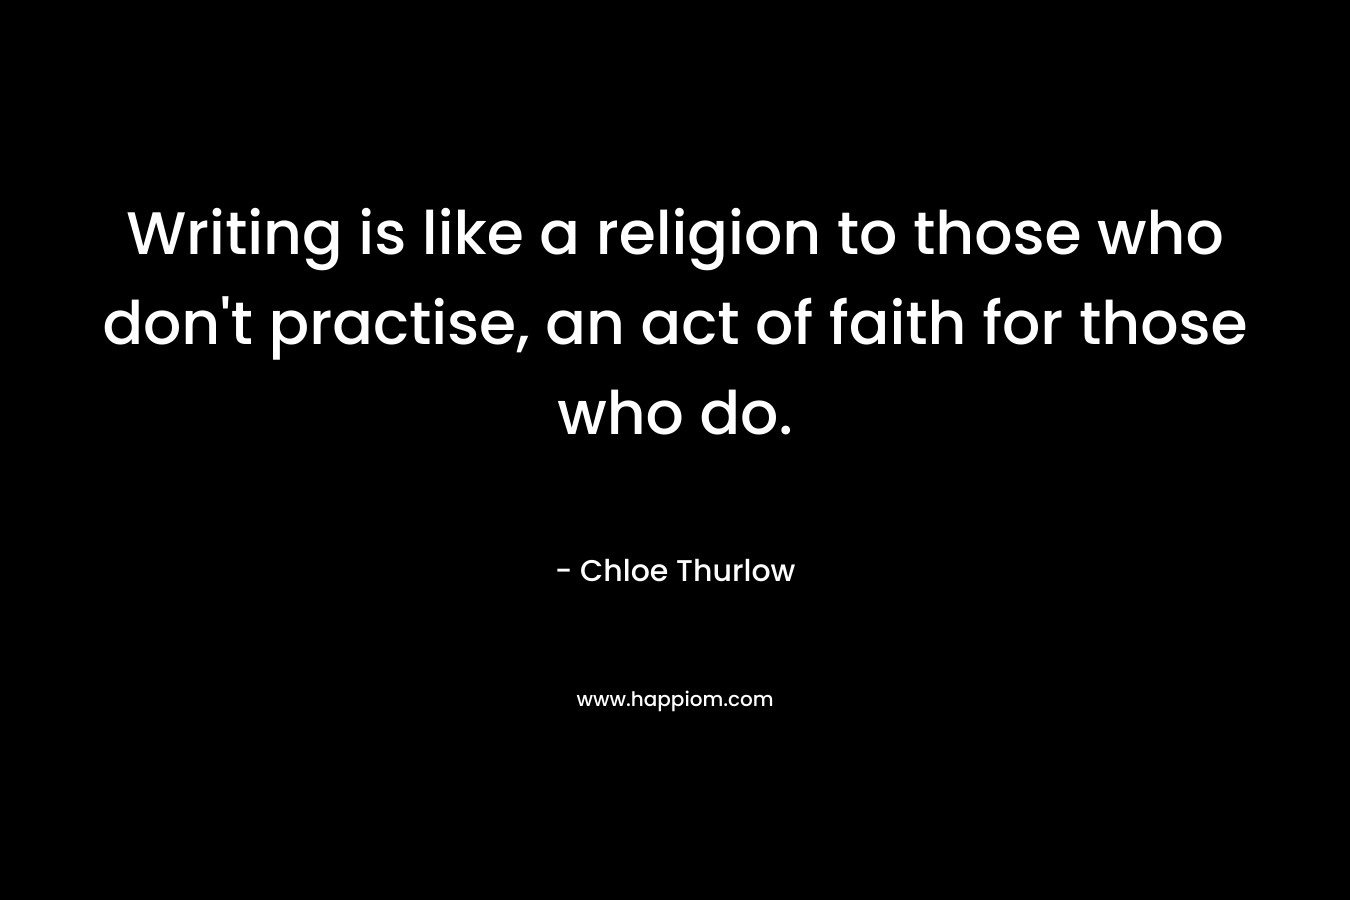 Writing is like a religion to those who don’t practise, an act of faith for those who do. – Chloe Thurlow